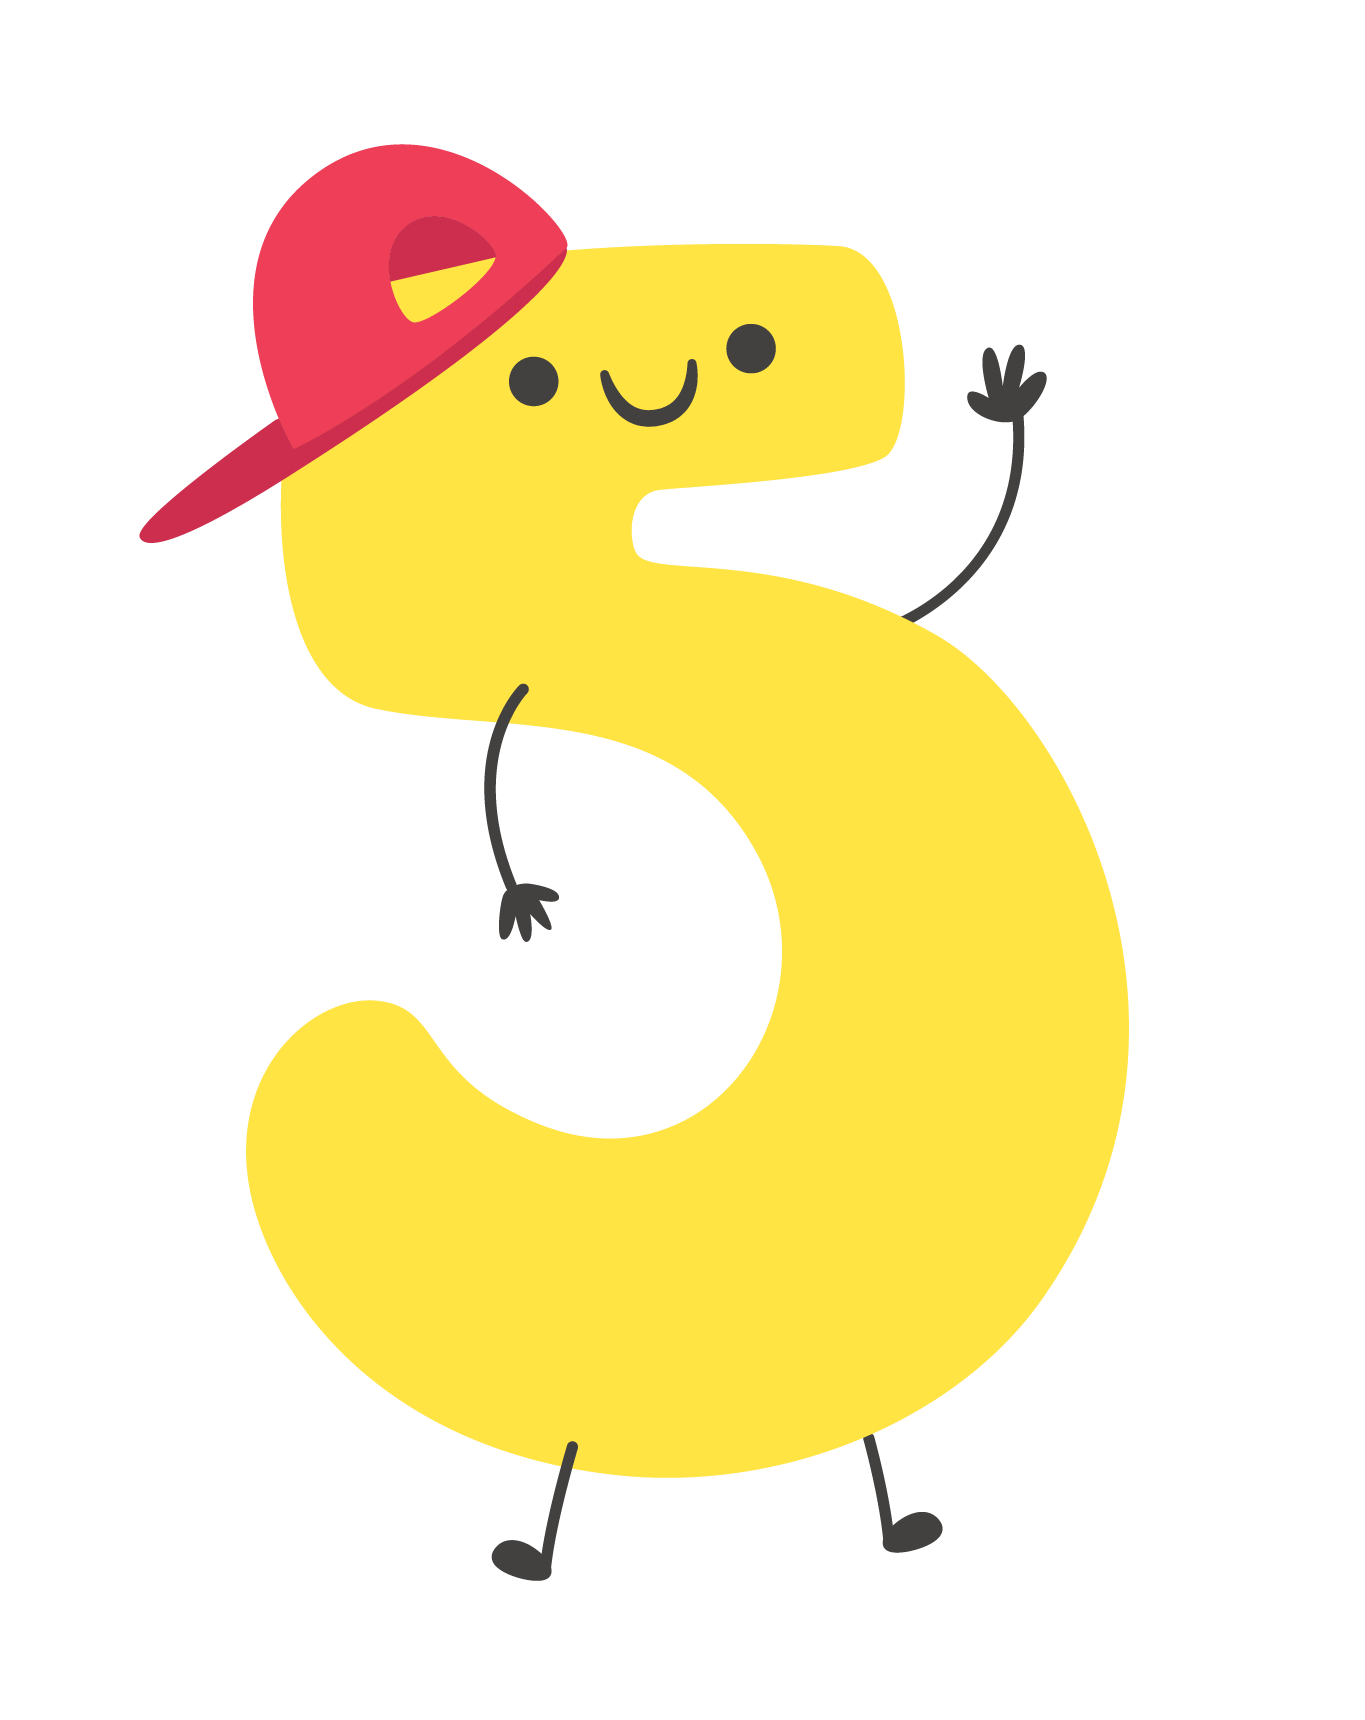 5 Number PNG HD Free Image